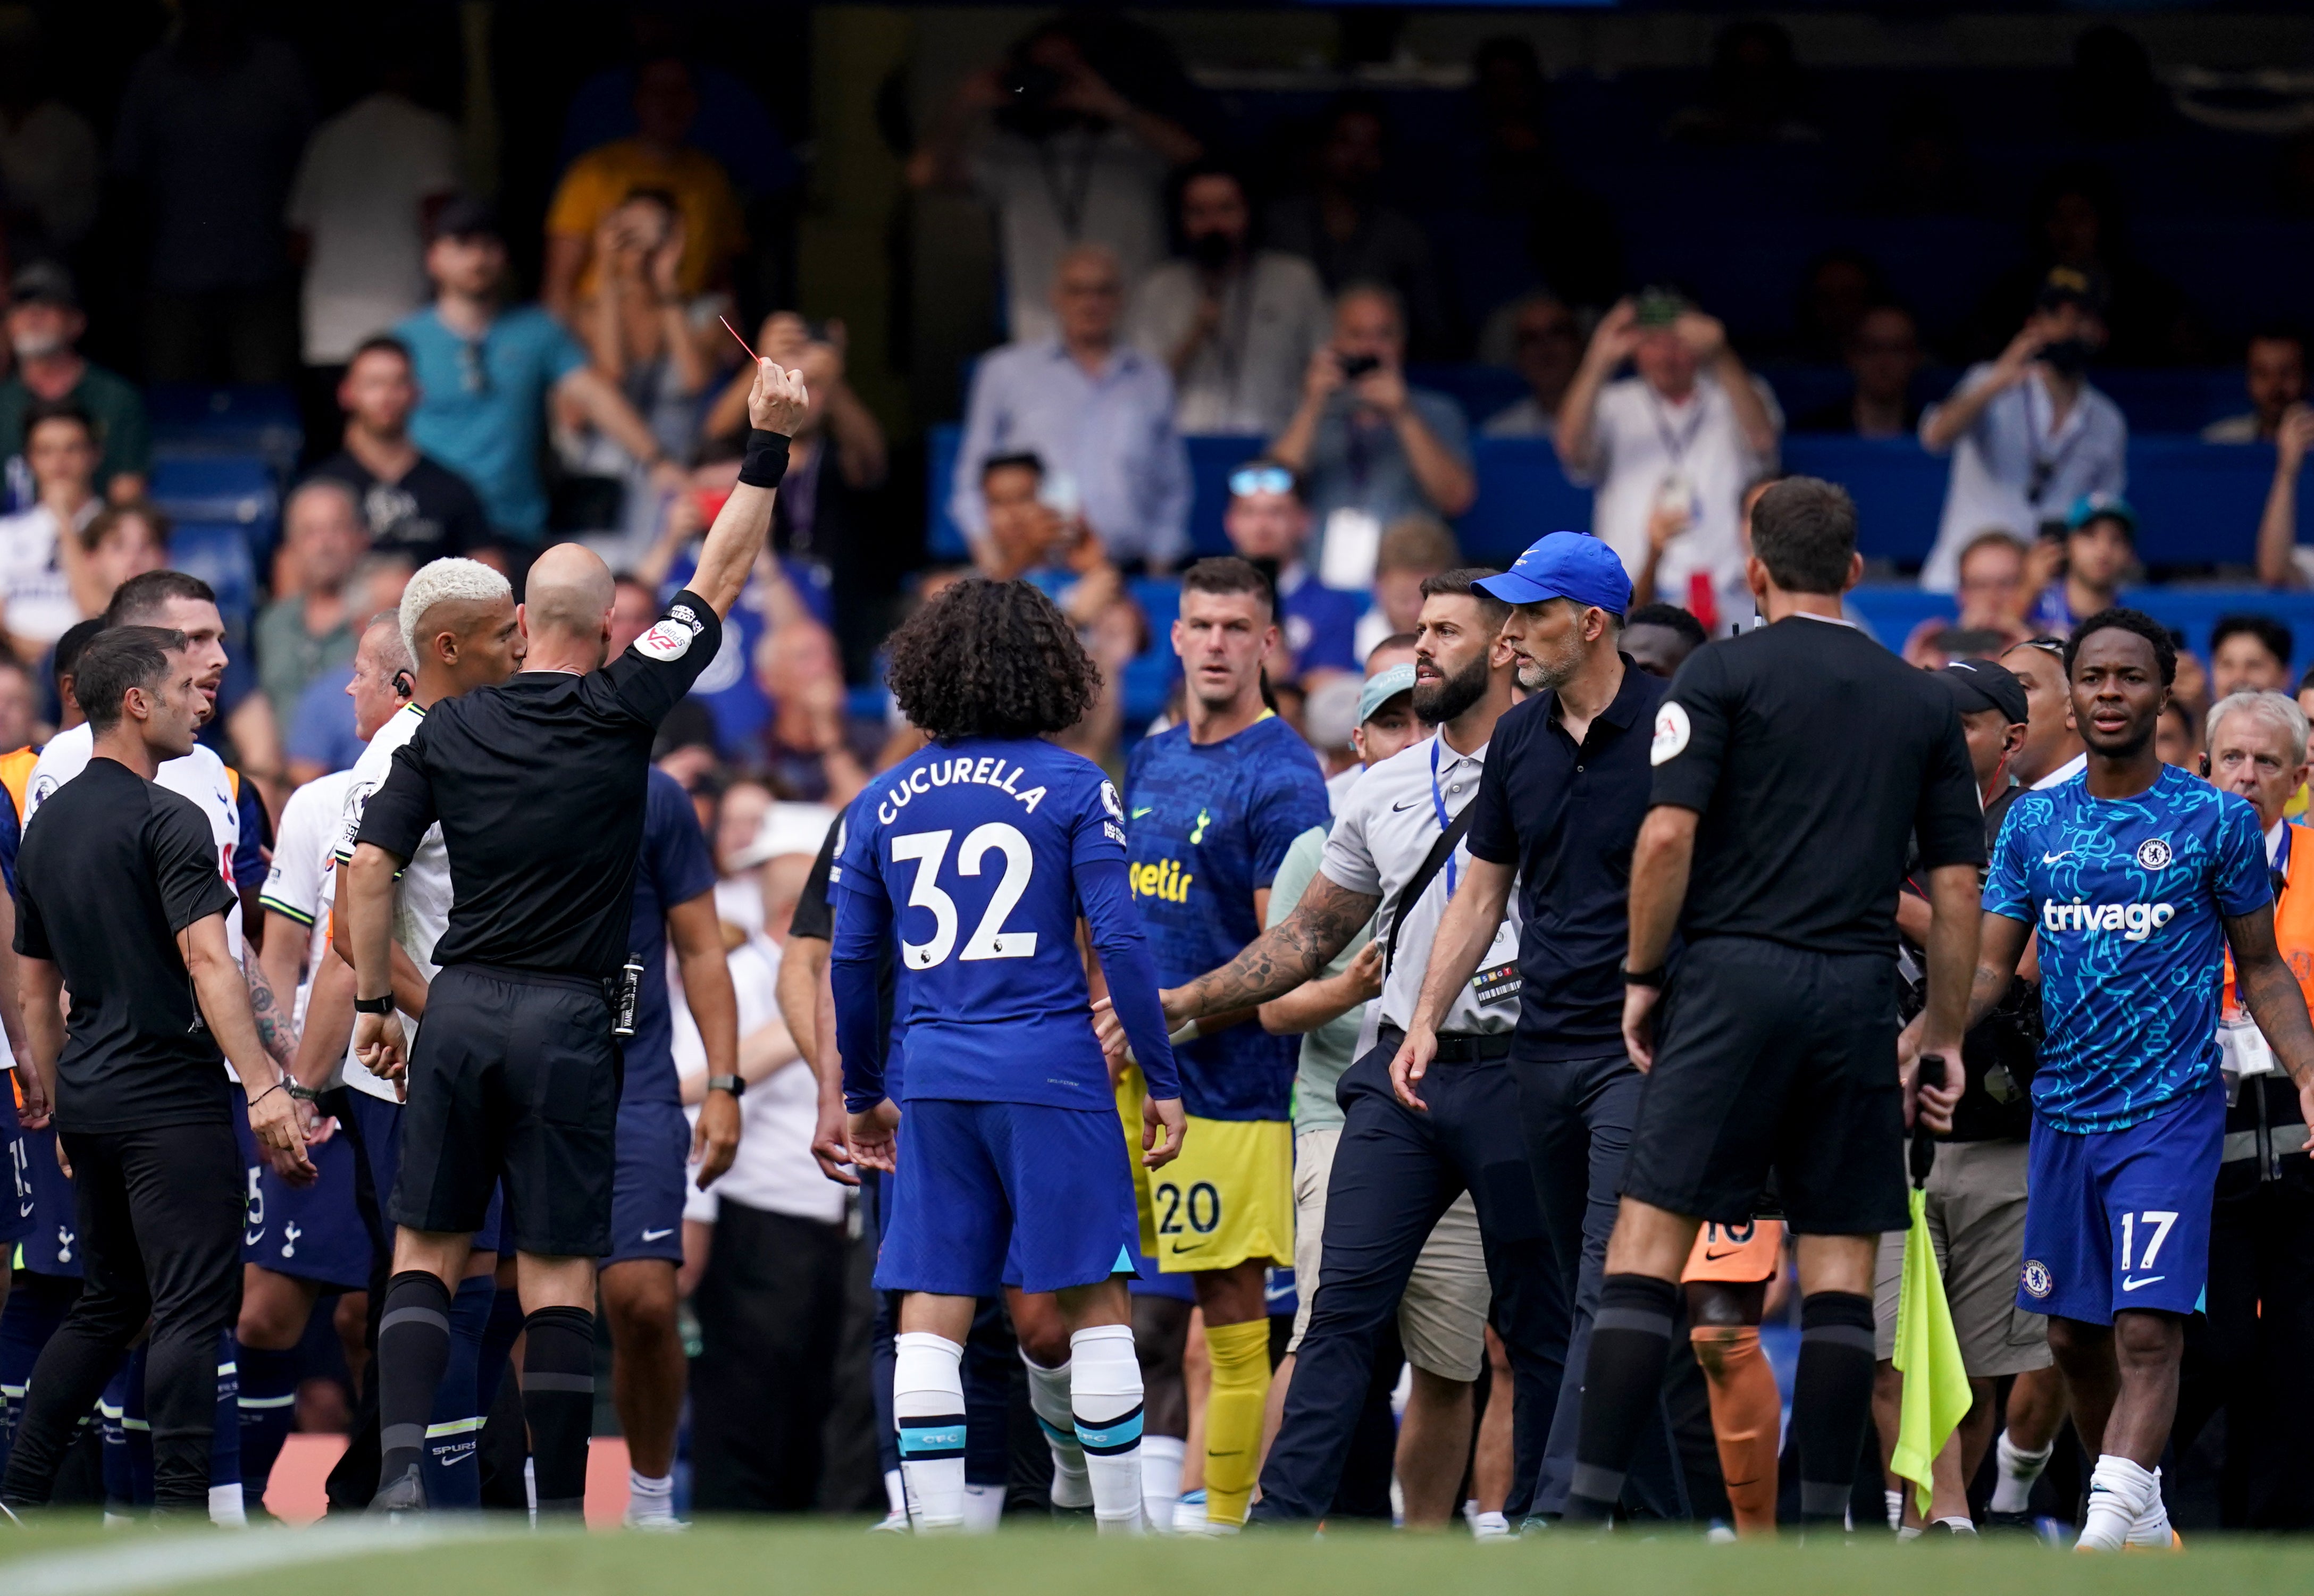 Chelsea manager Thomas Tuchel is sent off by referee Anthony Taylor during the Premier League match at Stamford Bridge (John Walton/PA)